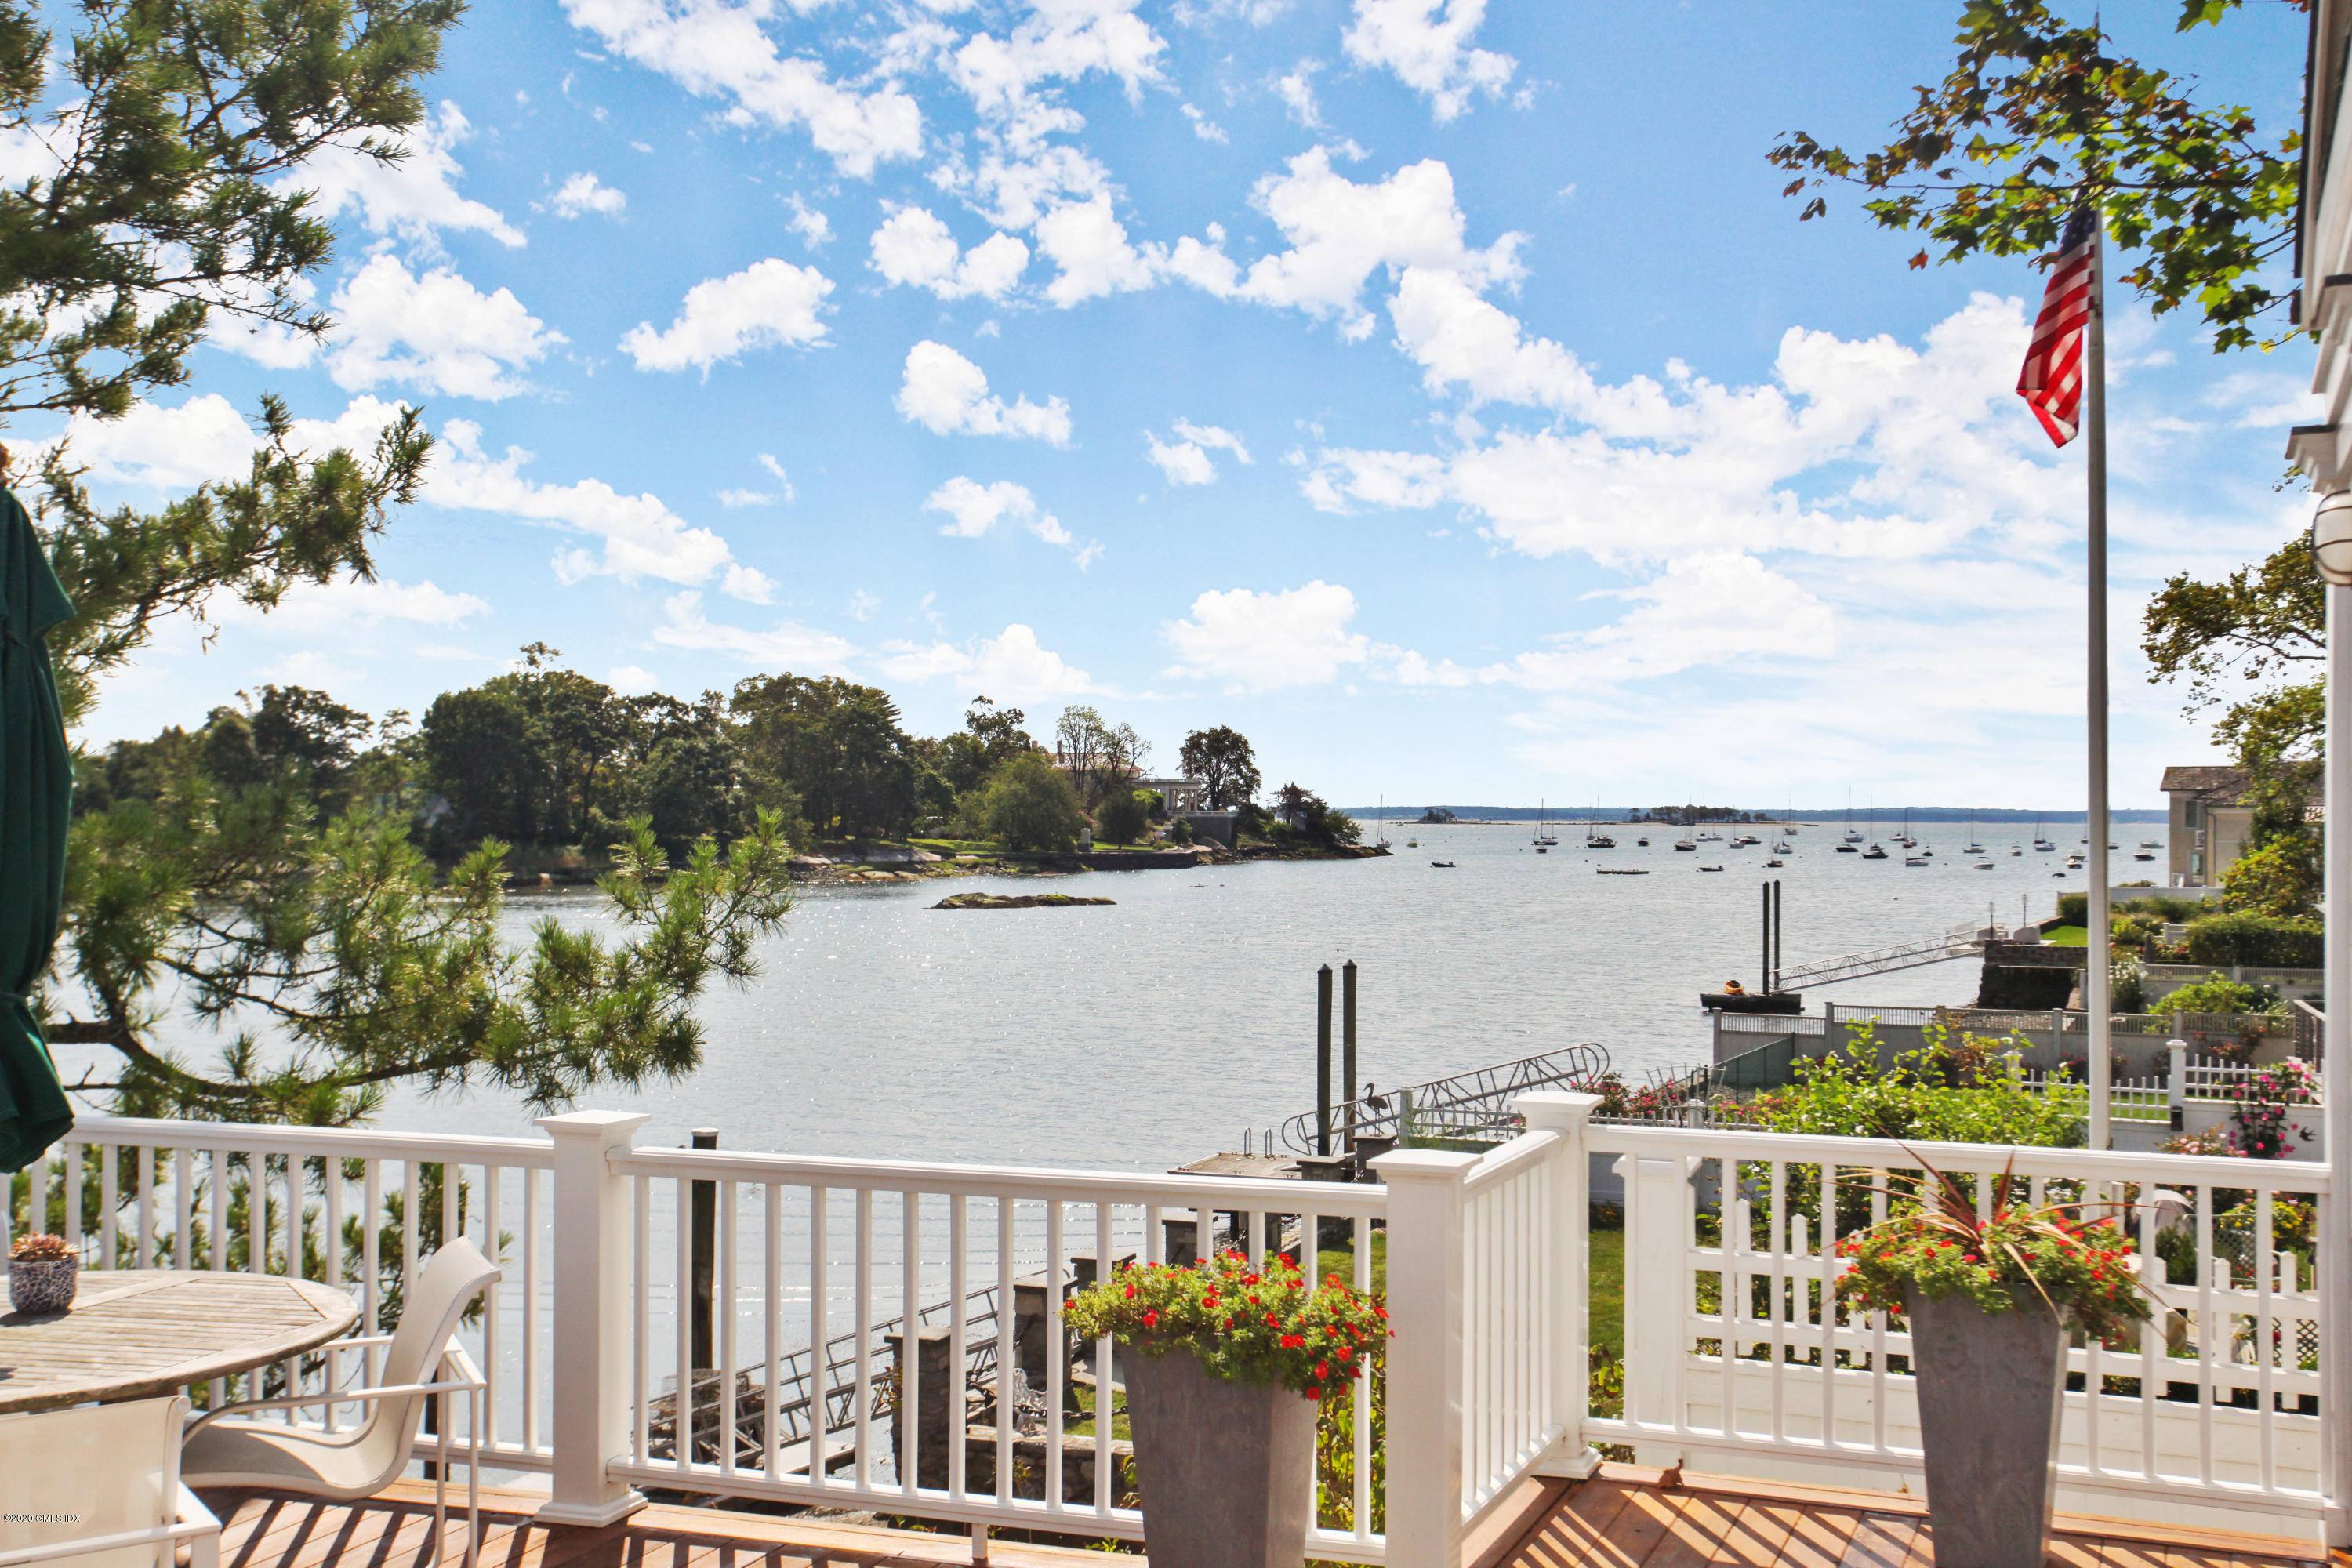 One of a kind DIRECT WATERFRONT with broad sweeping views of Long Island Sound on picturesque Smith Cove on Steamboat Rd.